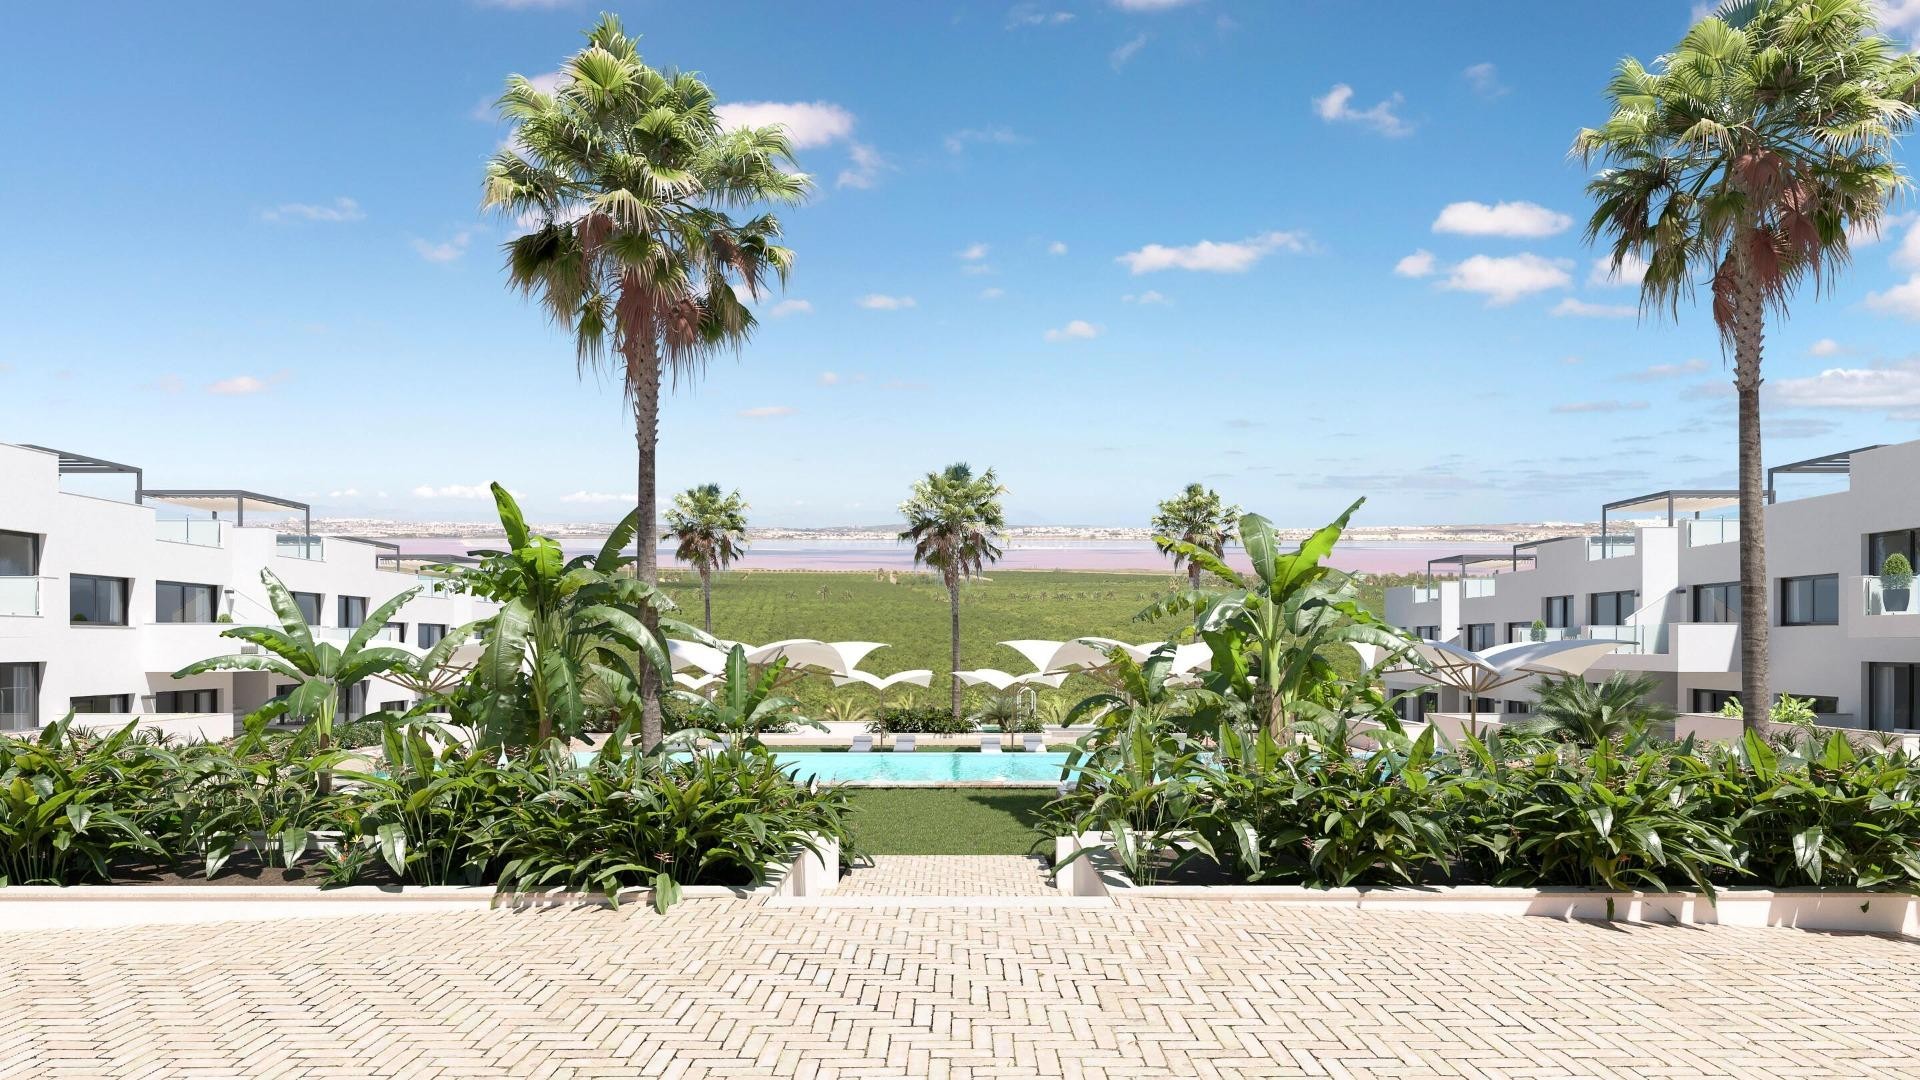 Bungalow apartments in Los Balcones at Torrevieja, 2 bedrooms and 2 bathrooms, all apartments have spectacular views of Torrevieja's pink lagoon